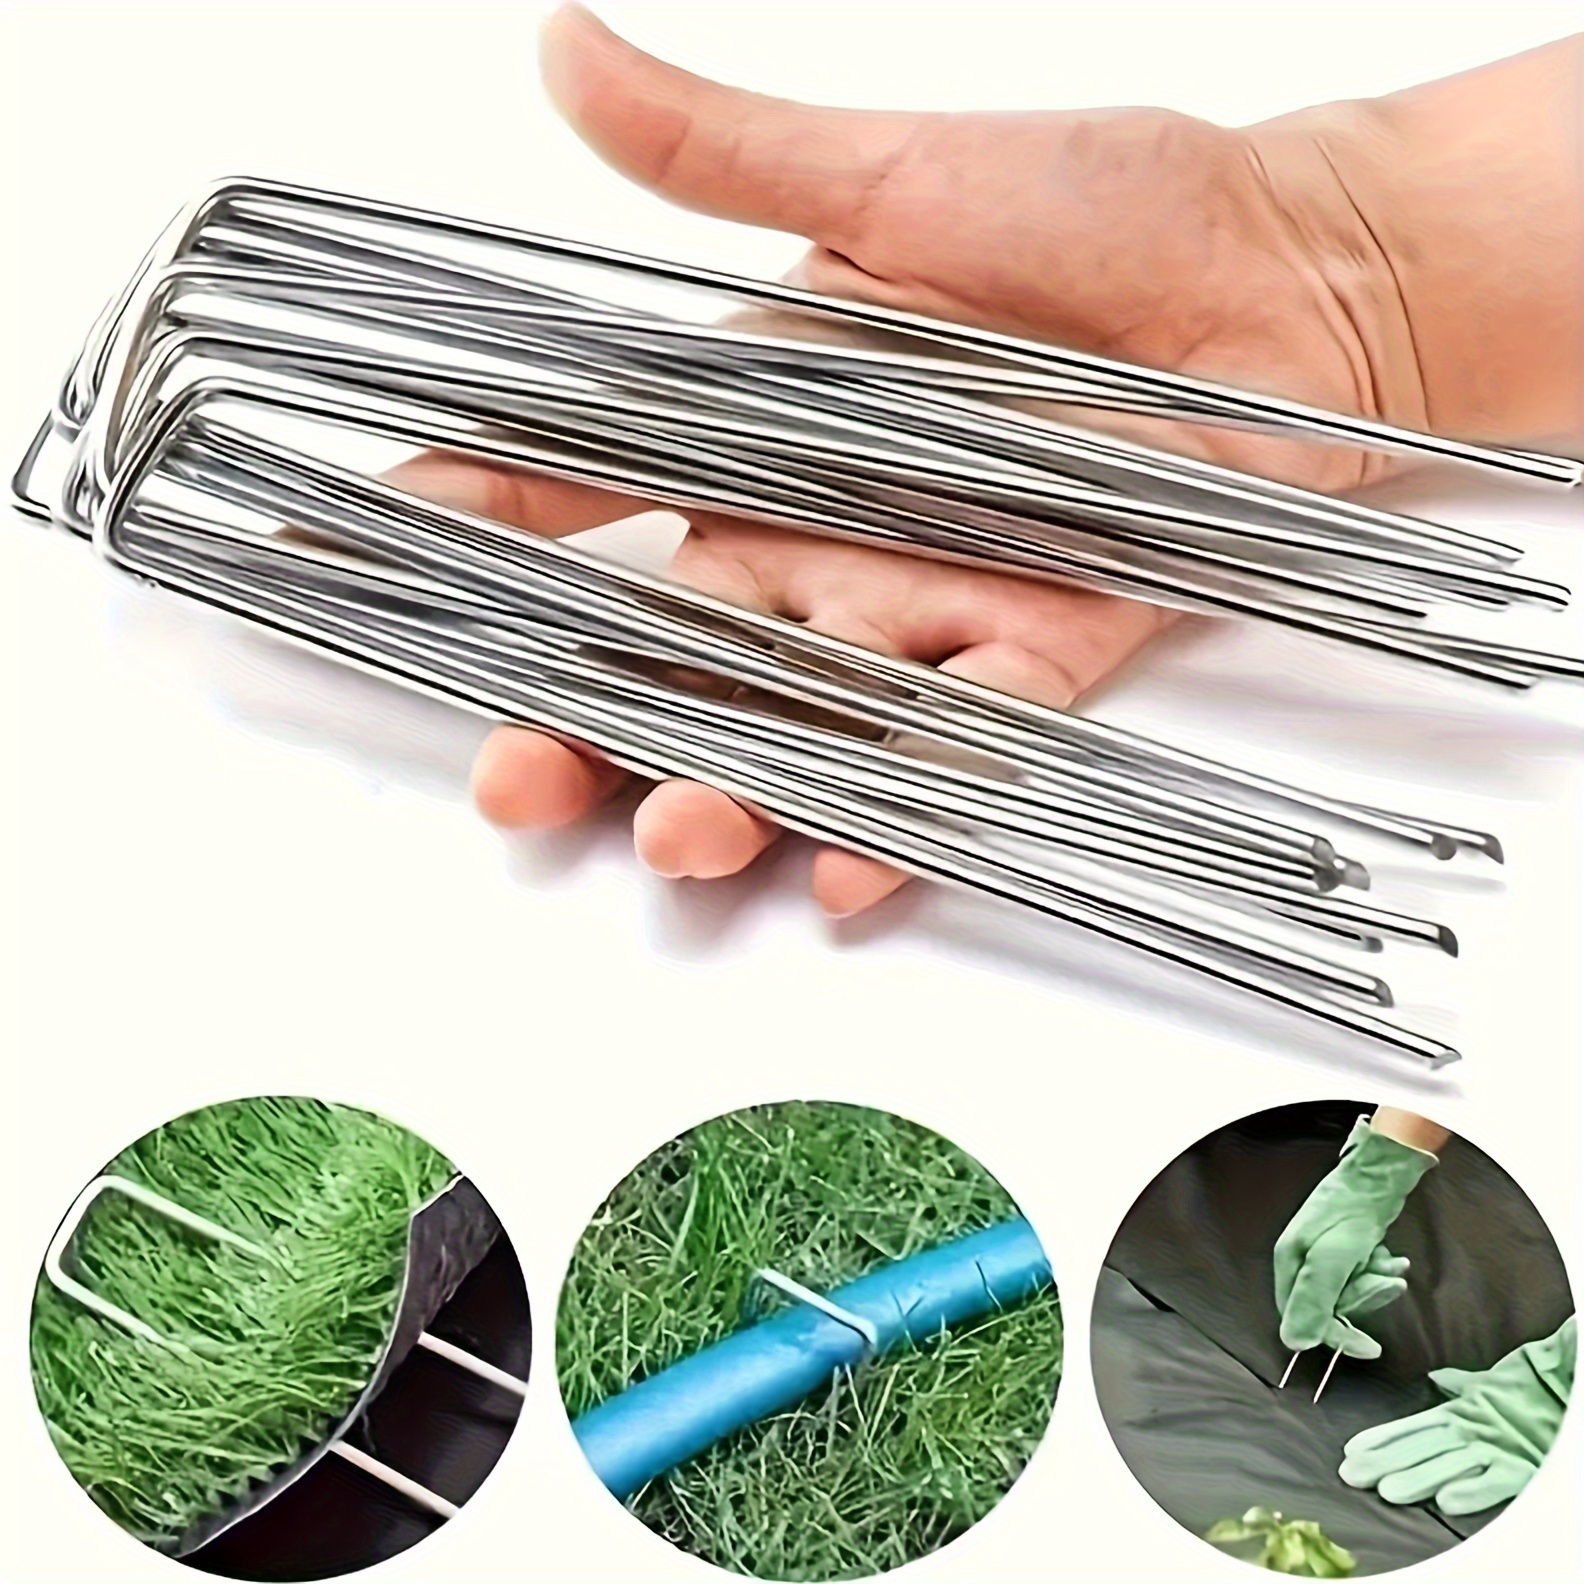 

20pcs, Galvanized U-shaped Garden Stakes, 1.57x7.87 Inch Artificial Grass Turf Pins, Heavy-duty Ground Pegs With Sharp Ends For Grass Mat, Sports Field Marking Outdoor Landscaping